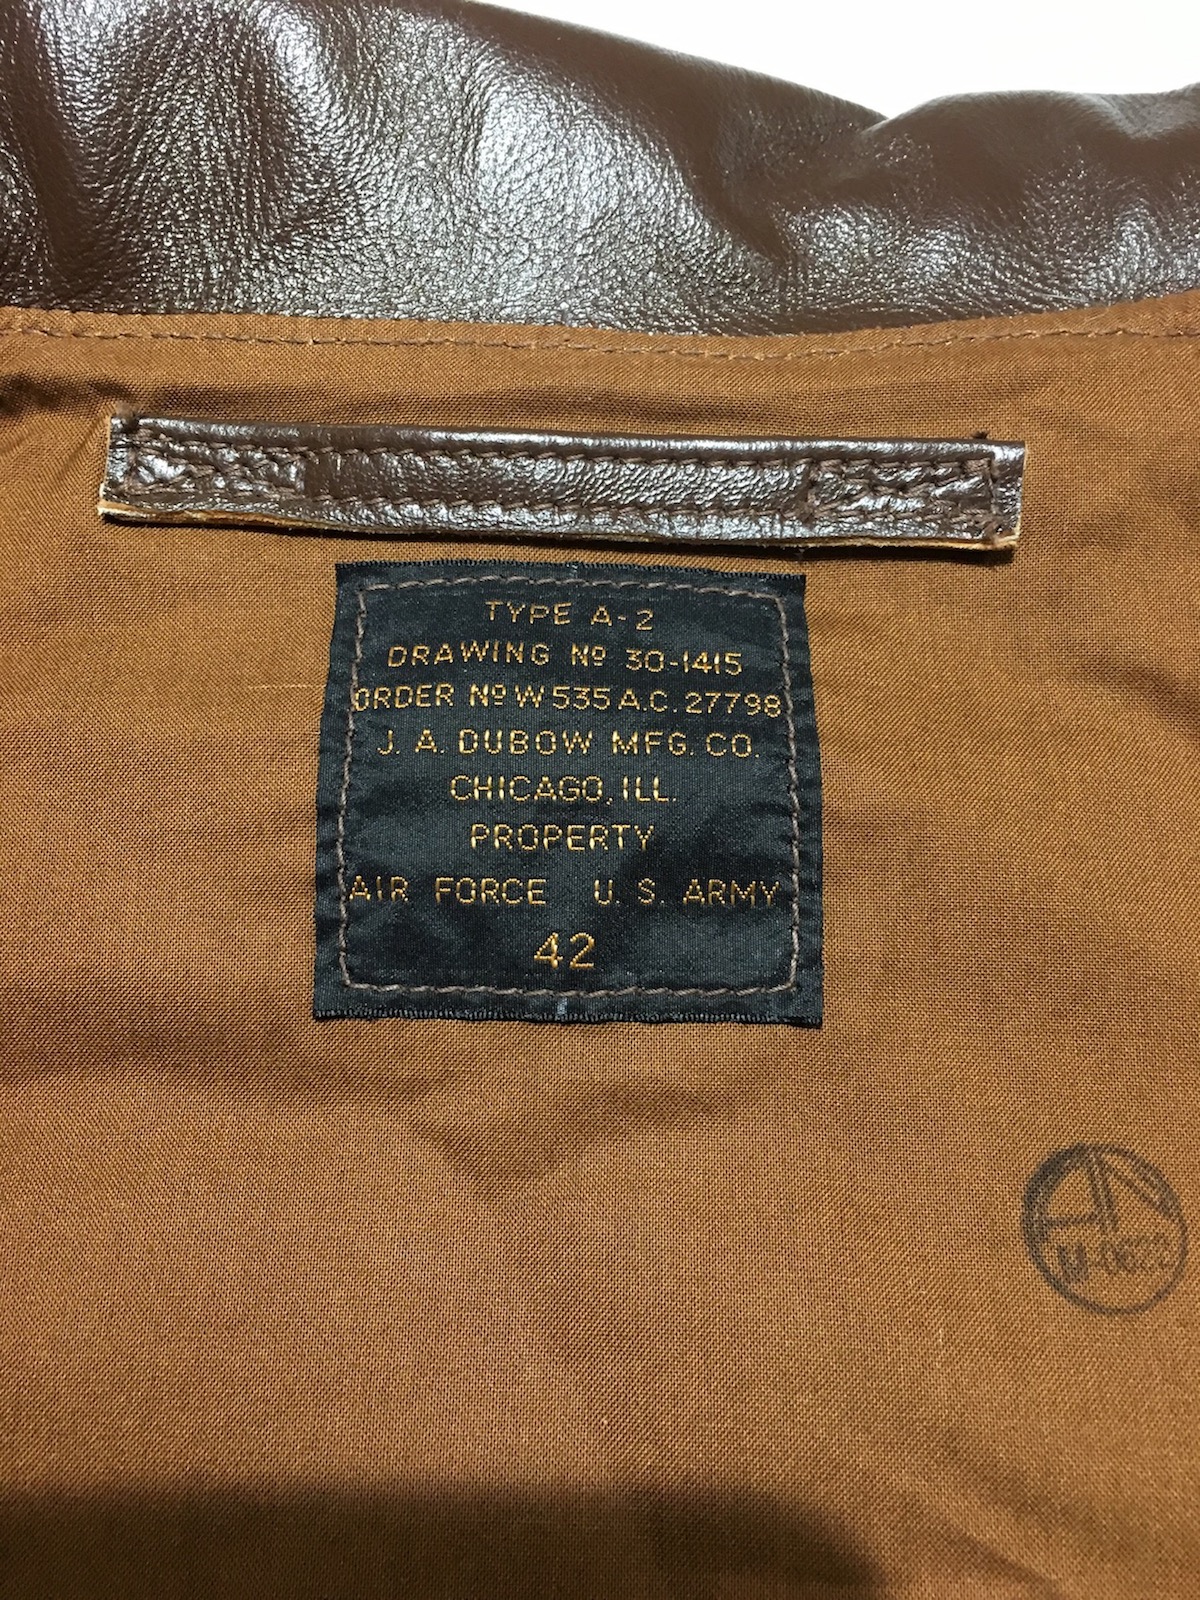 For sale: The Real Mccoy's A-2 jackets, sizes 42 and 44 | The Fedora Lounge